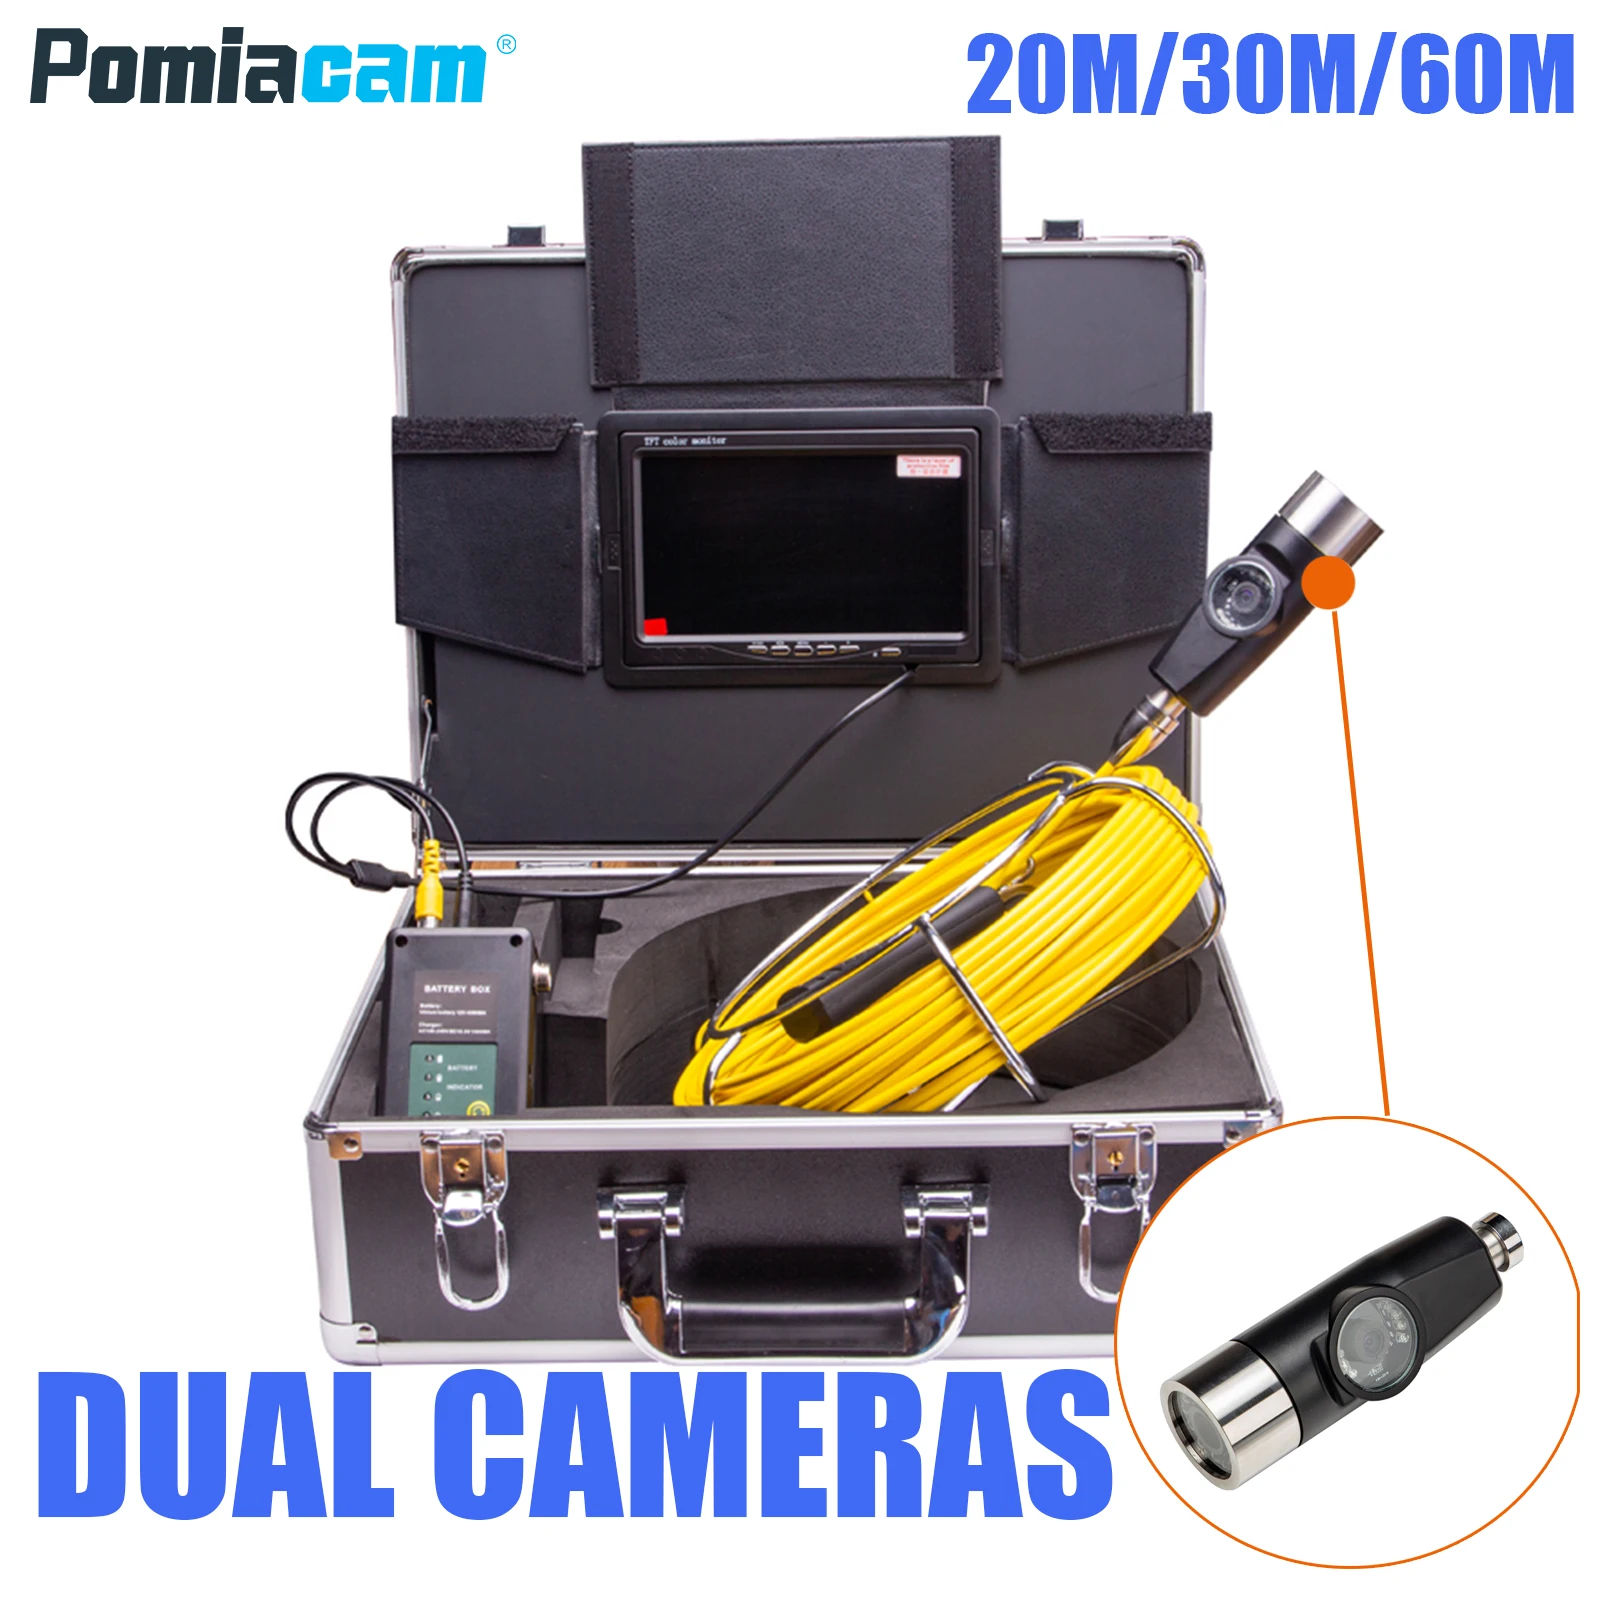 

WP70E 20M-50M Cable Endoscope 7 inch LCD 12LED/6LED Dual cameras Sewer Pipe Inspection System Borescope video with Aluminum box